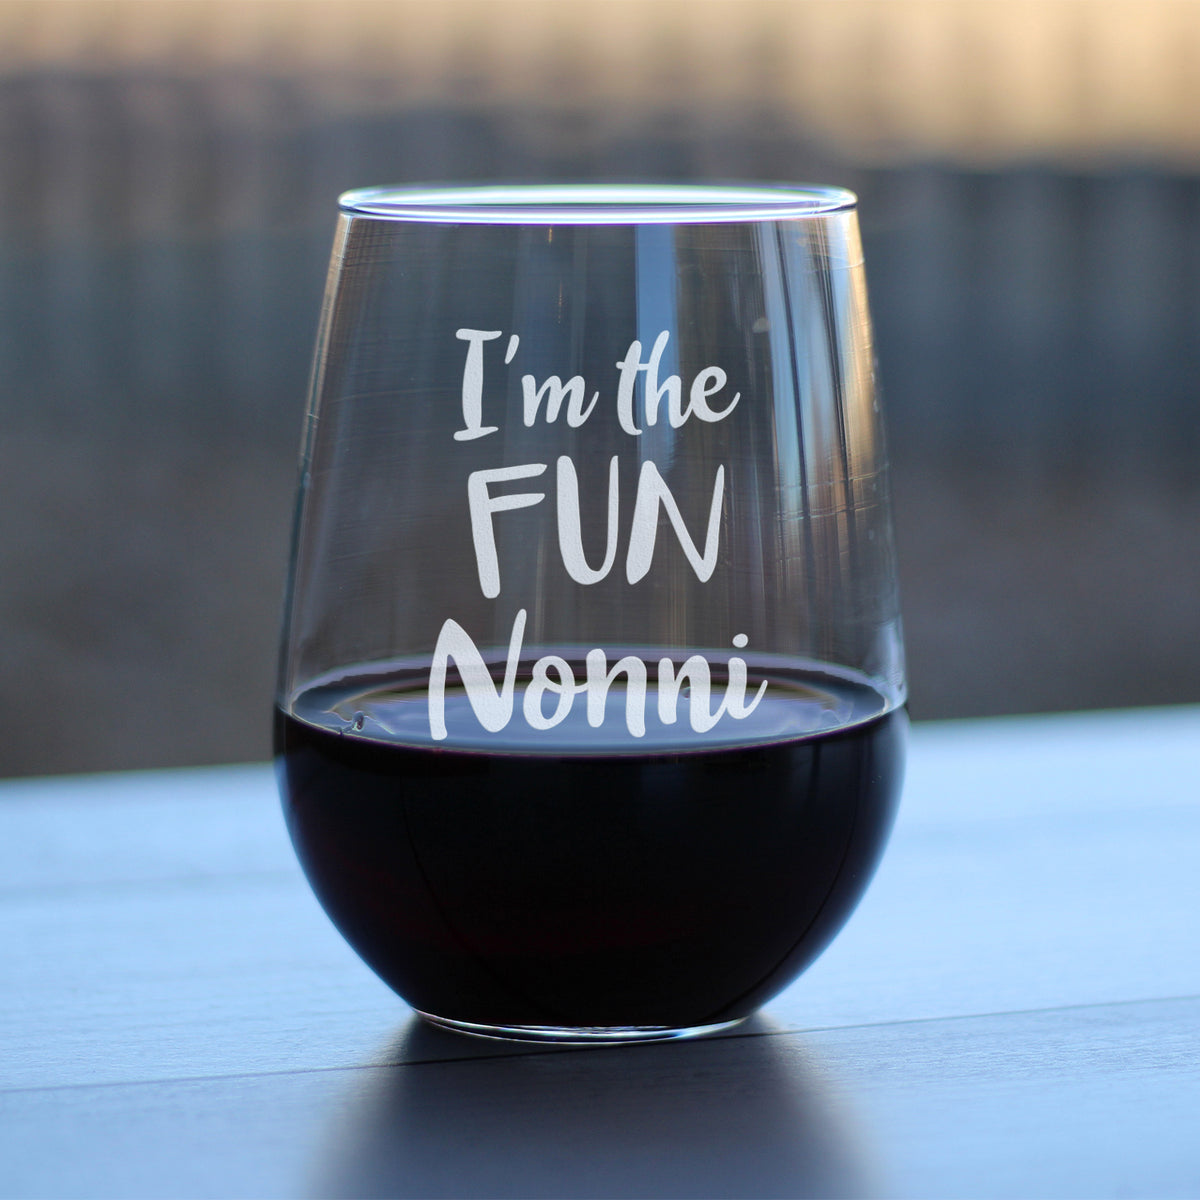 Fun Nonni – Cute Funny Stemless Wine Glass, Large 17 Ounce Size, Etched Sayings, Gift Box